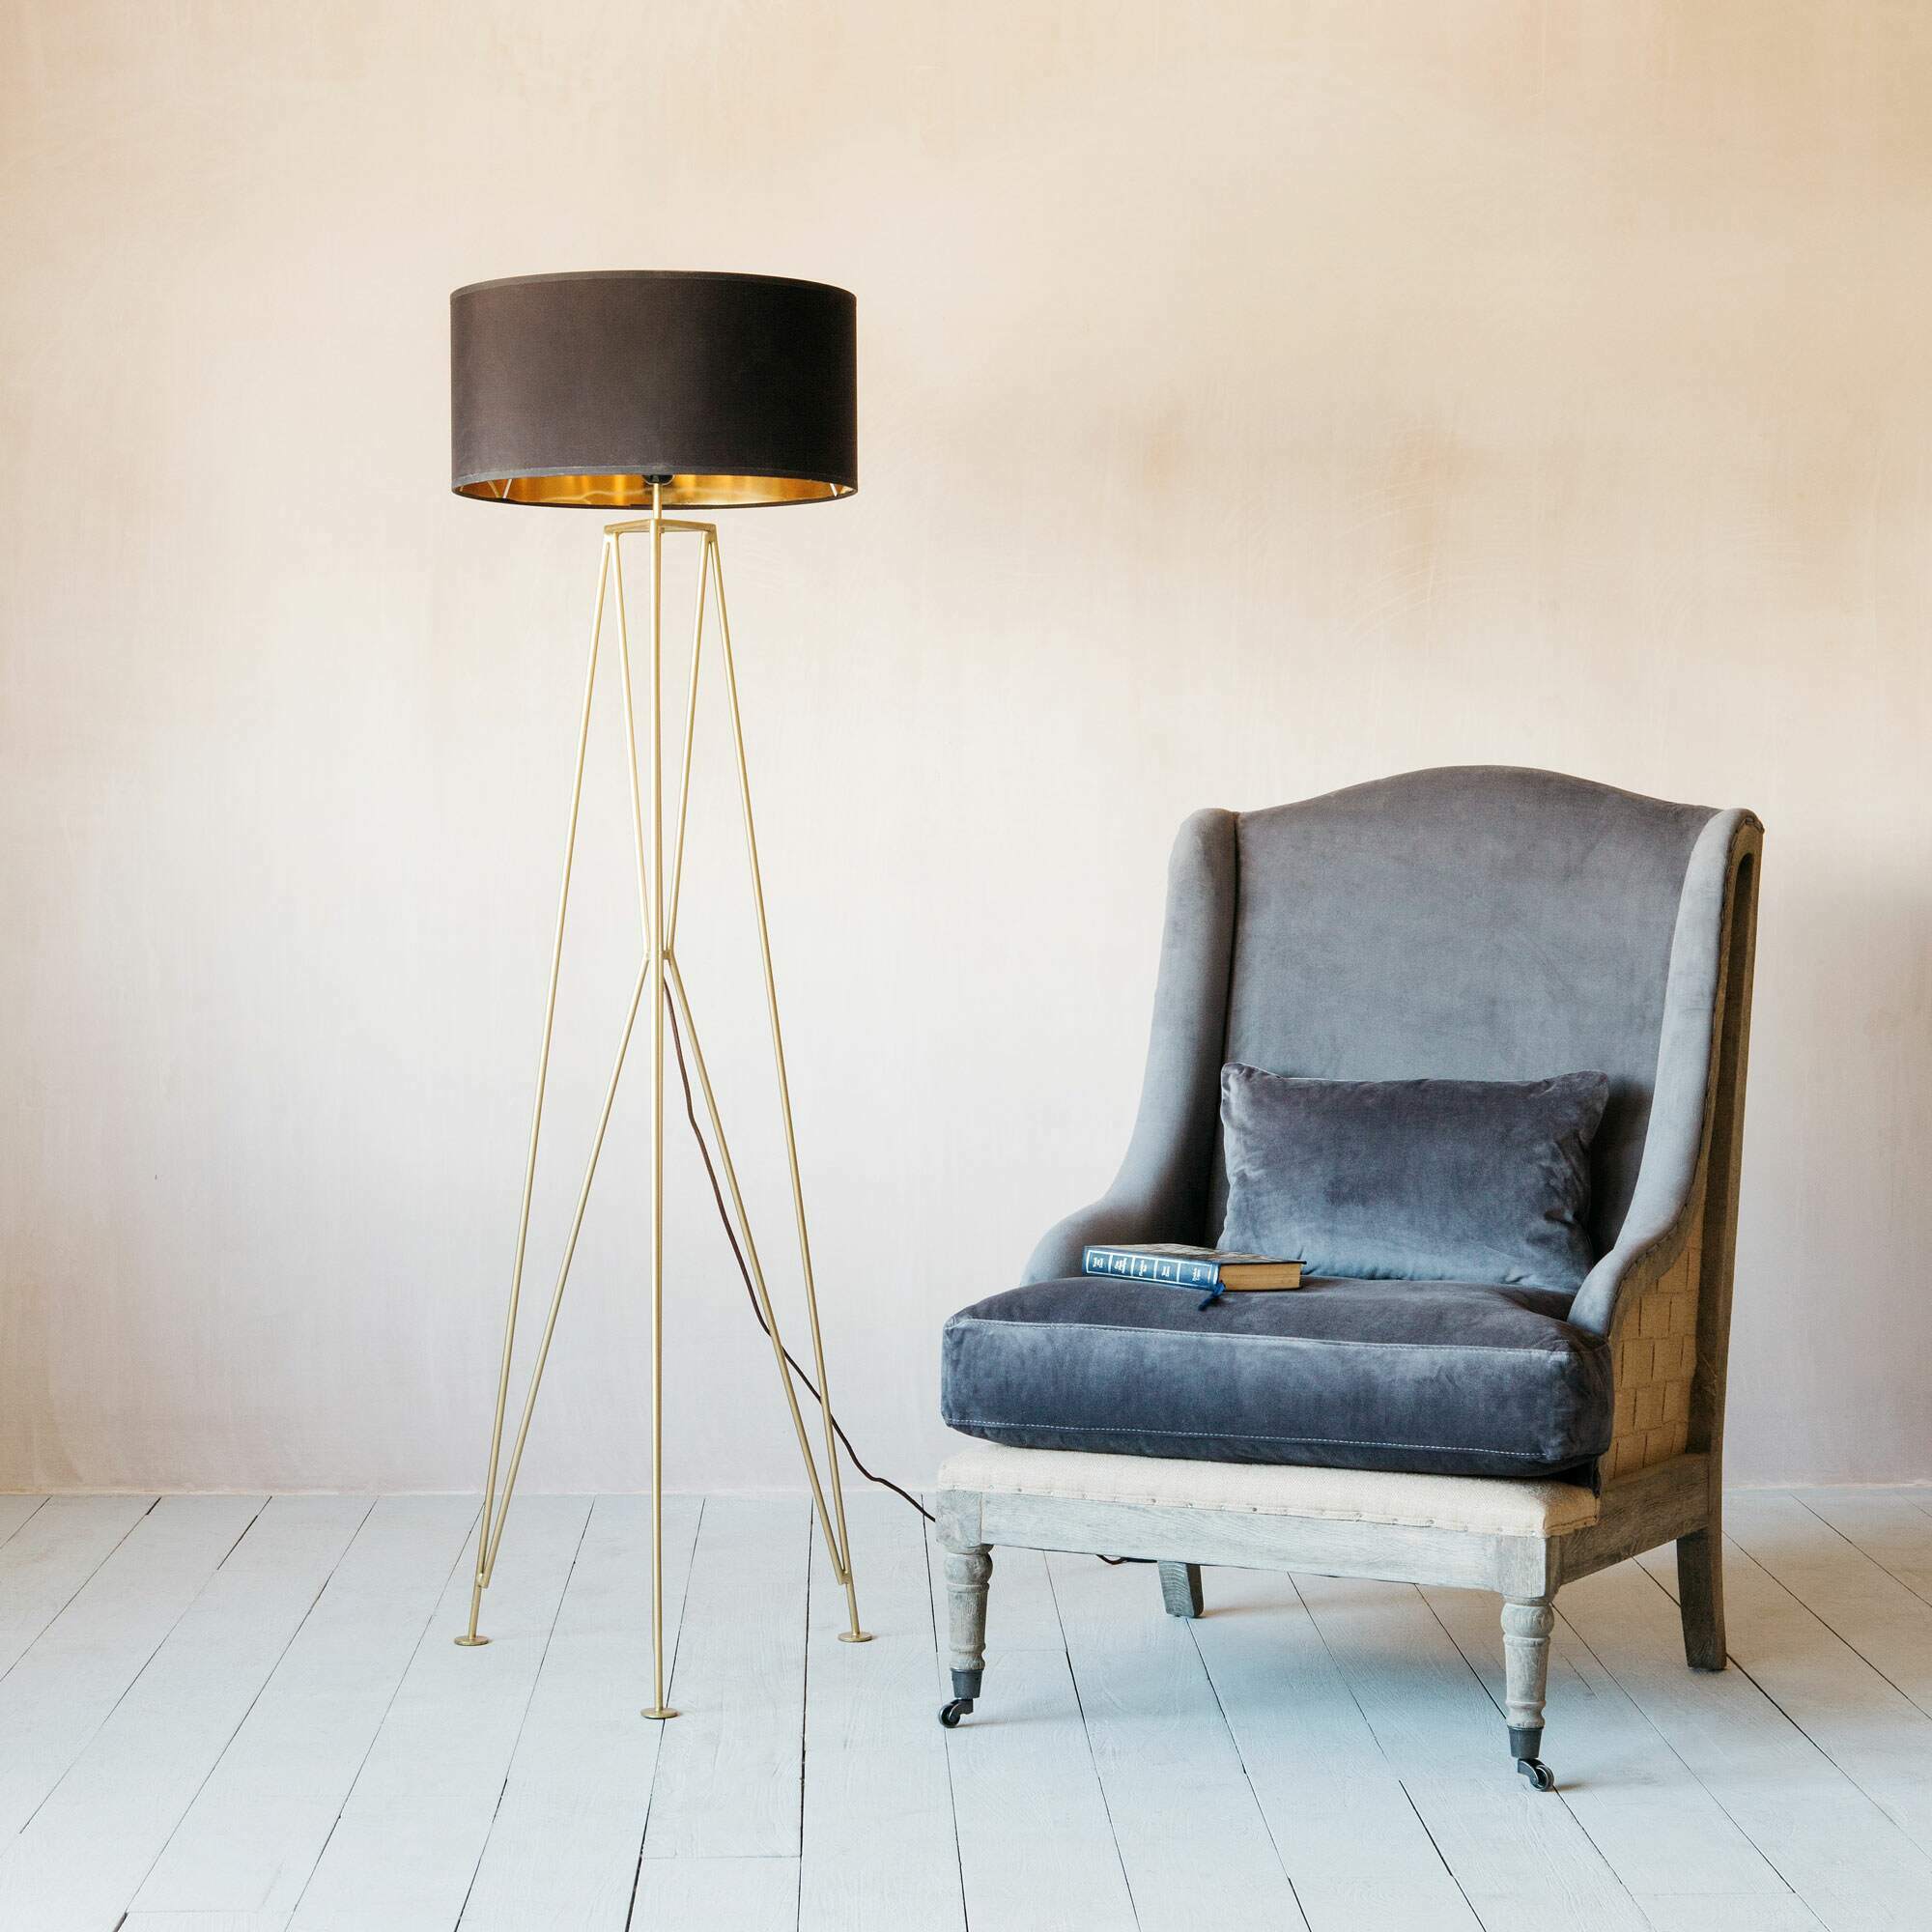 Photo of Graham and green maxwell gold tripod floor lamp